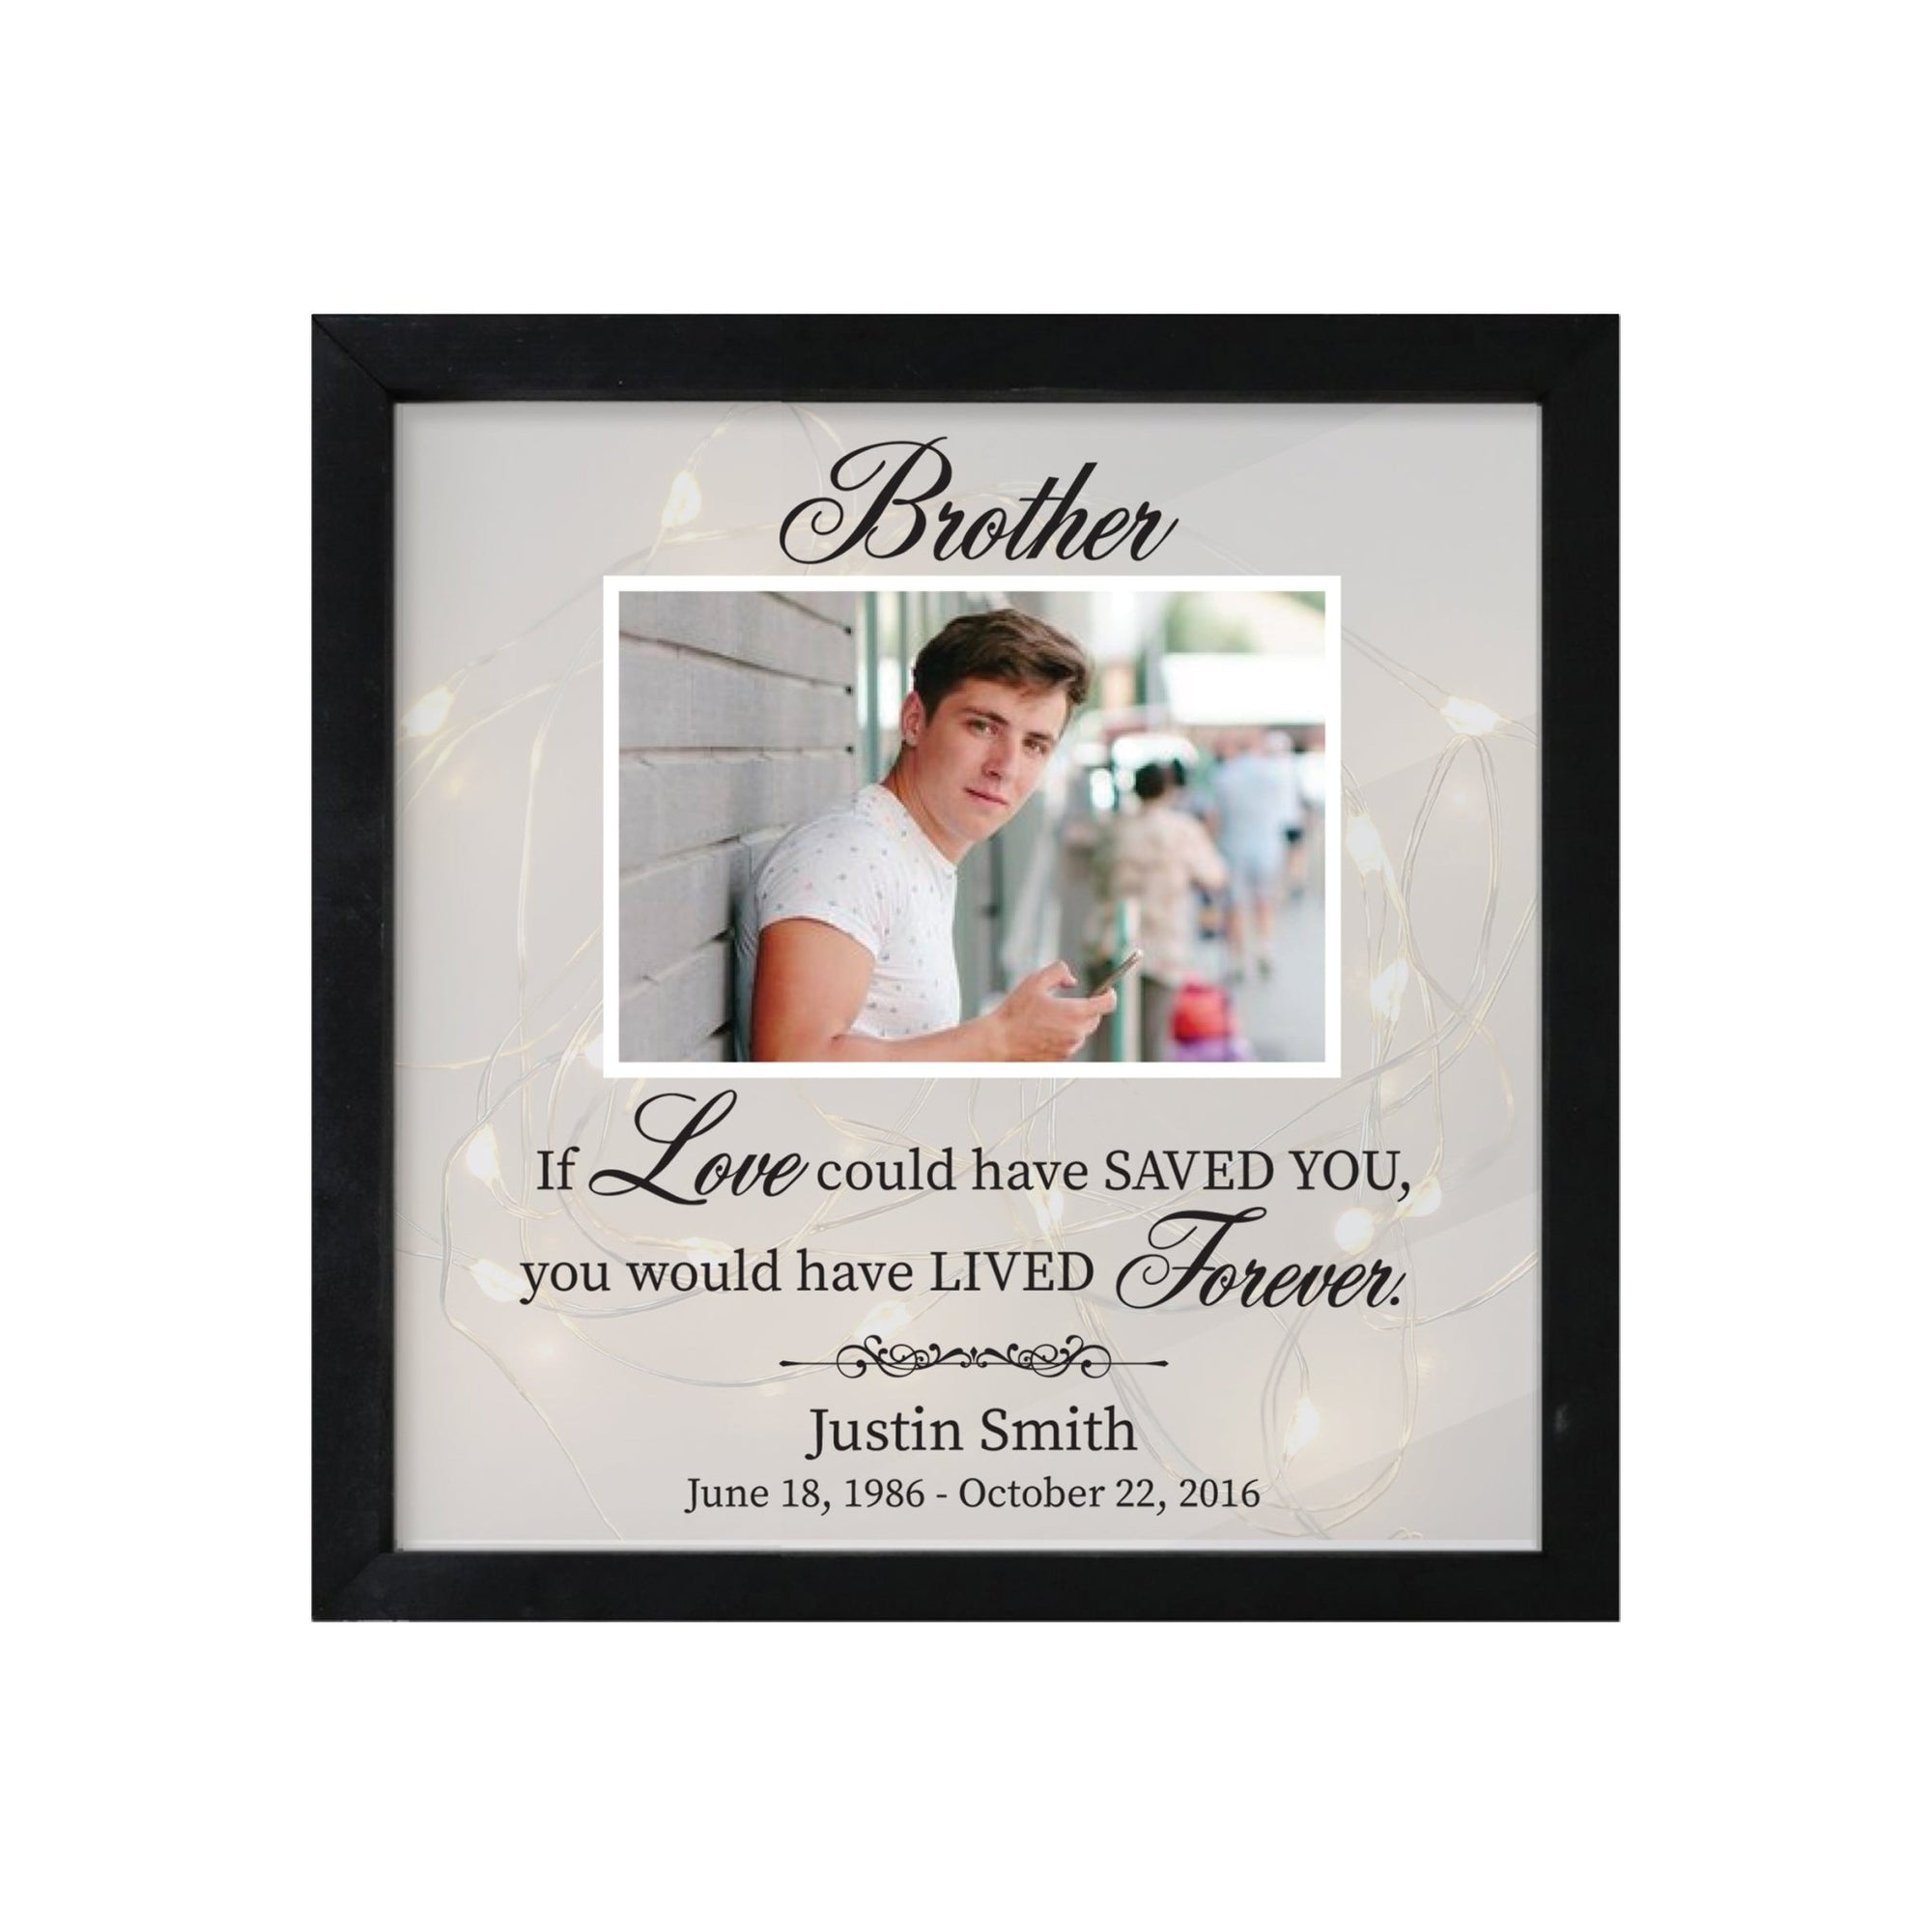 Personalized Memorial Black Framed Shadow Box With Lights Sympathy Gift & Wall Décor - If Love Could (Brother) - LifeSong Milestones